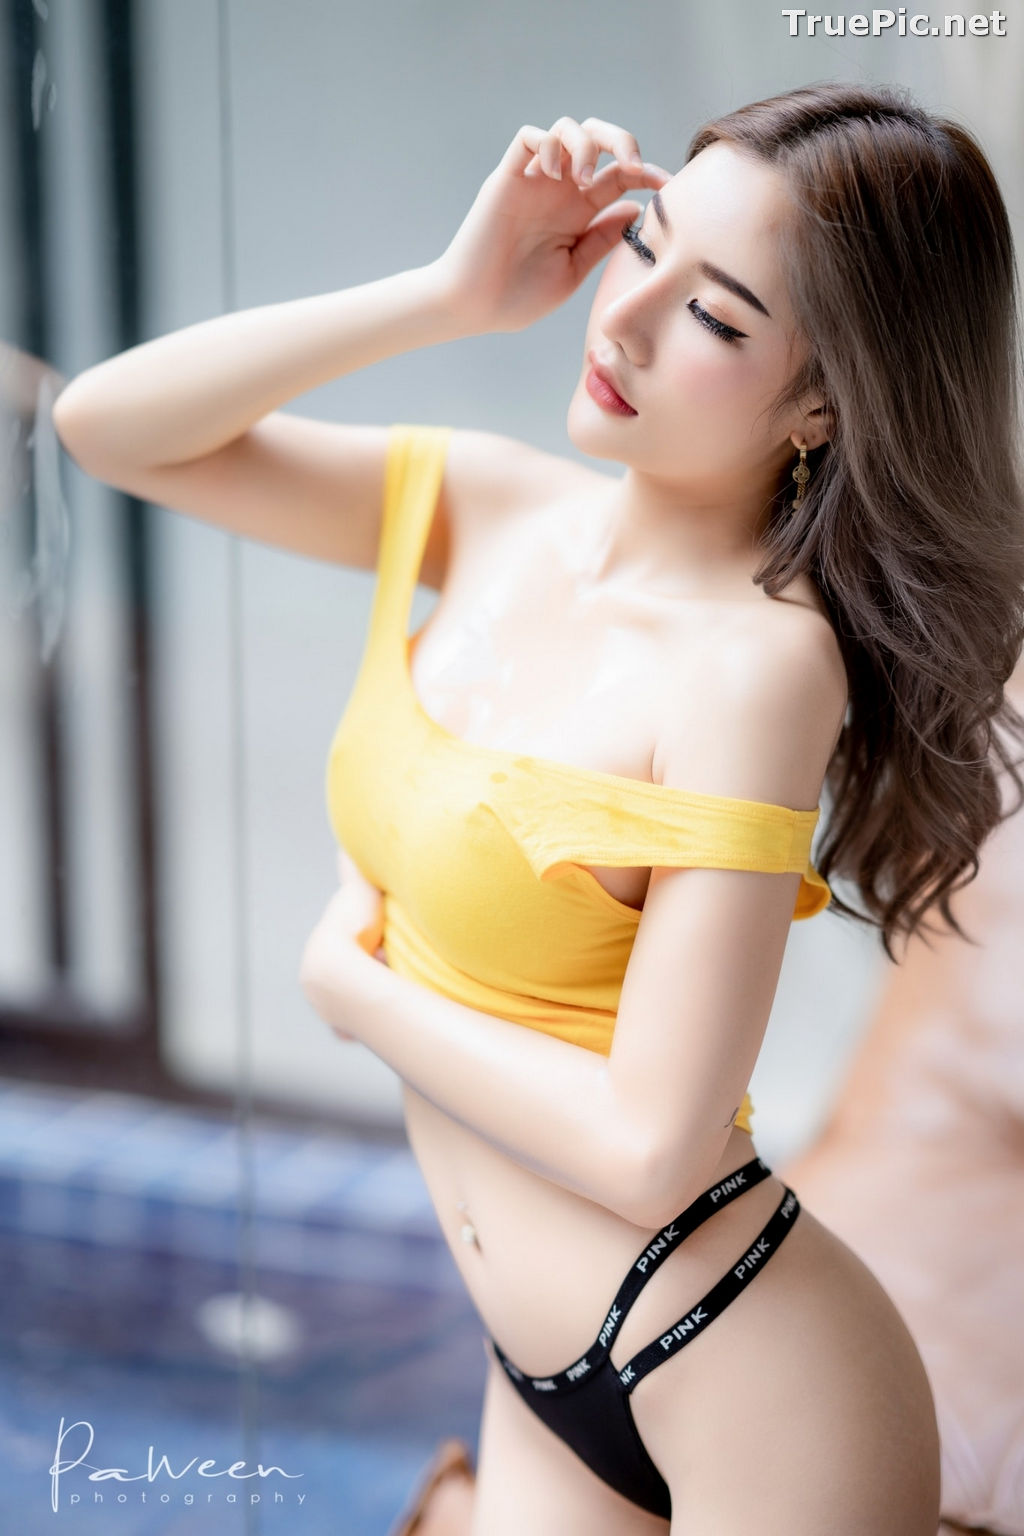 Image Thailand Model - Atittaya Chaiyasing - Take Shower After a Nice Day - TruePic.net - Picture-16